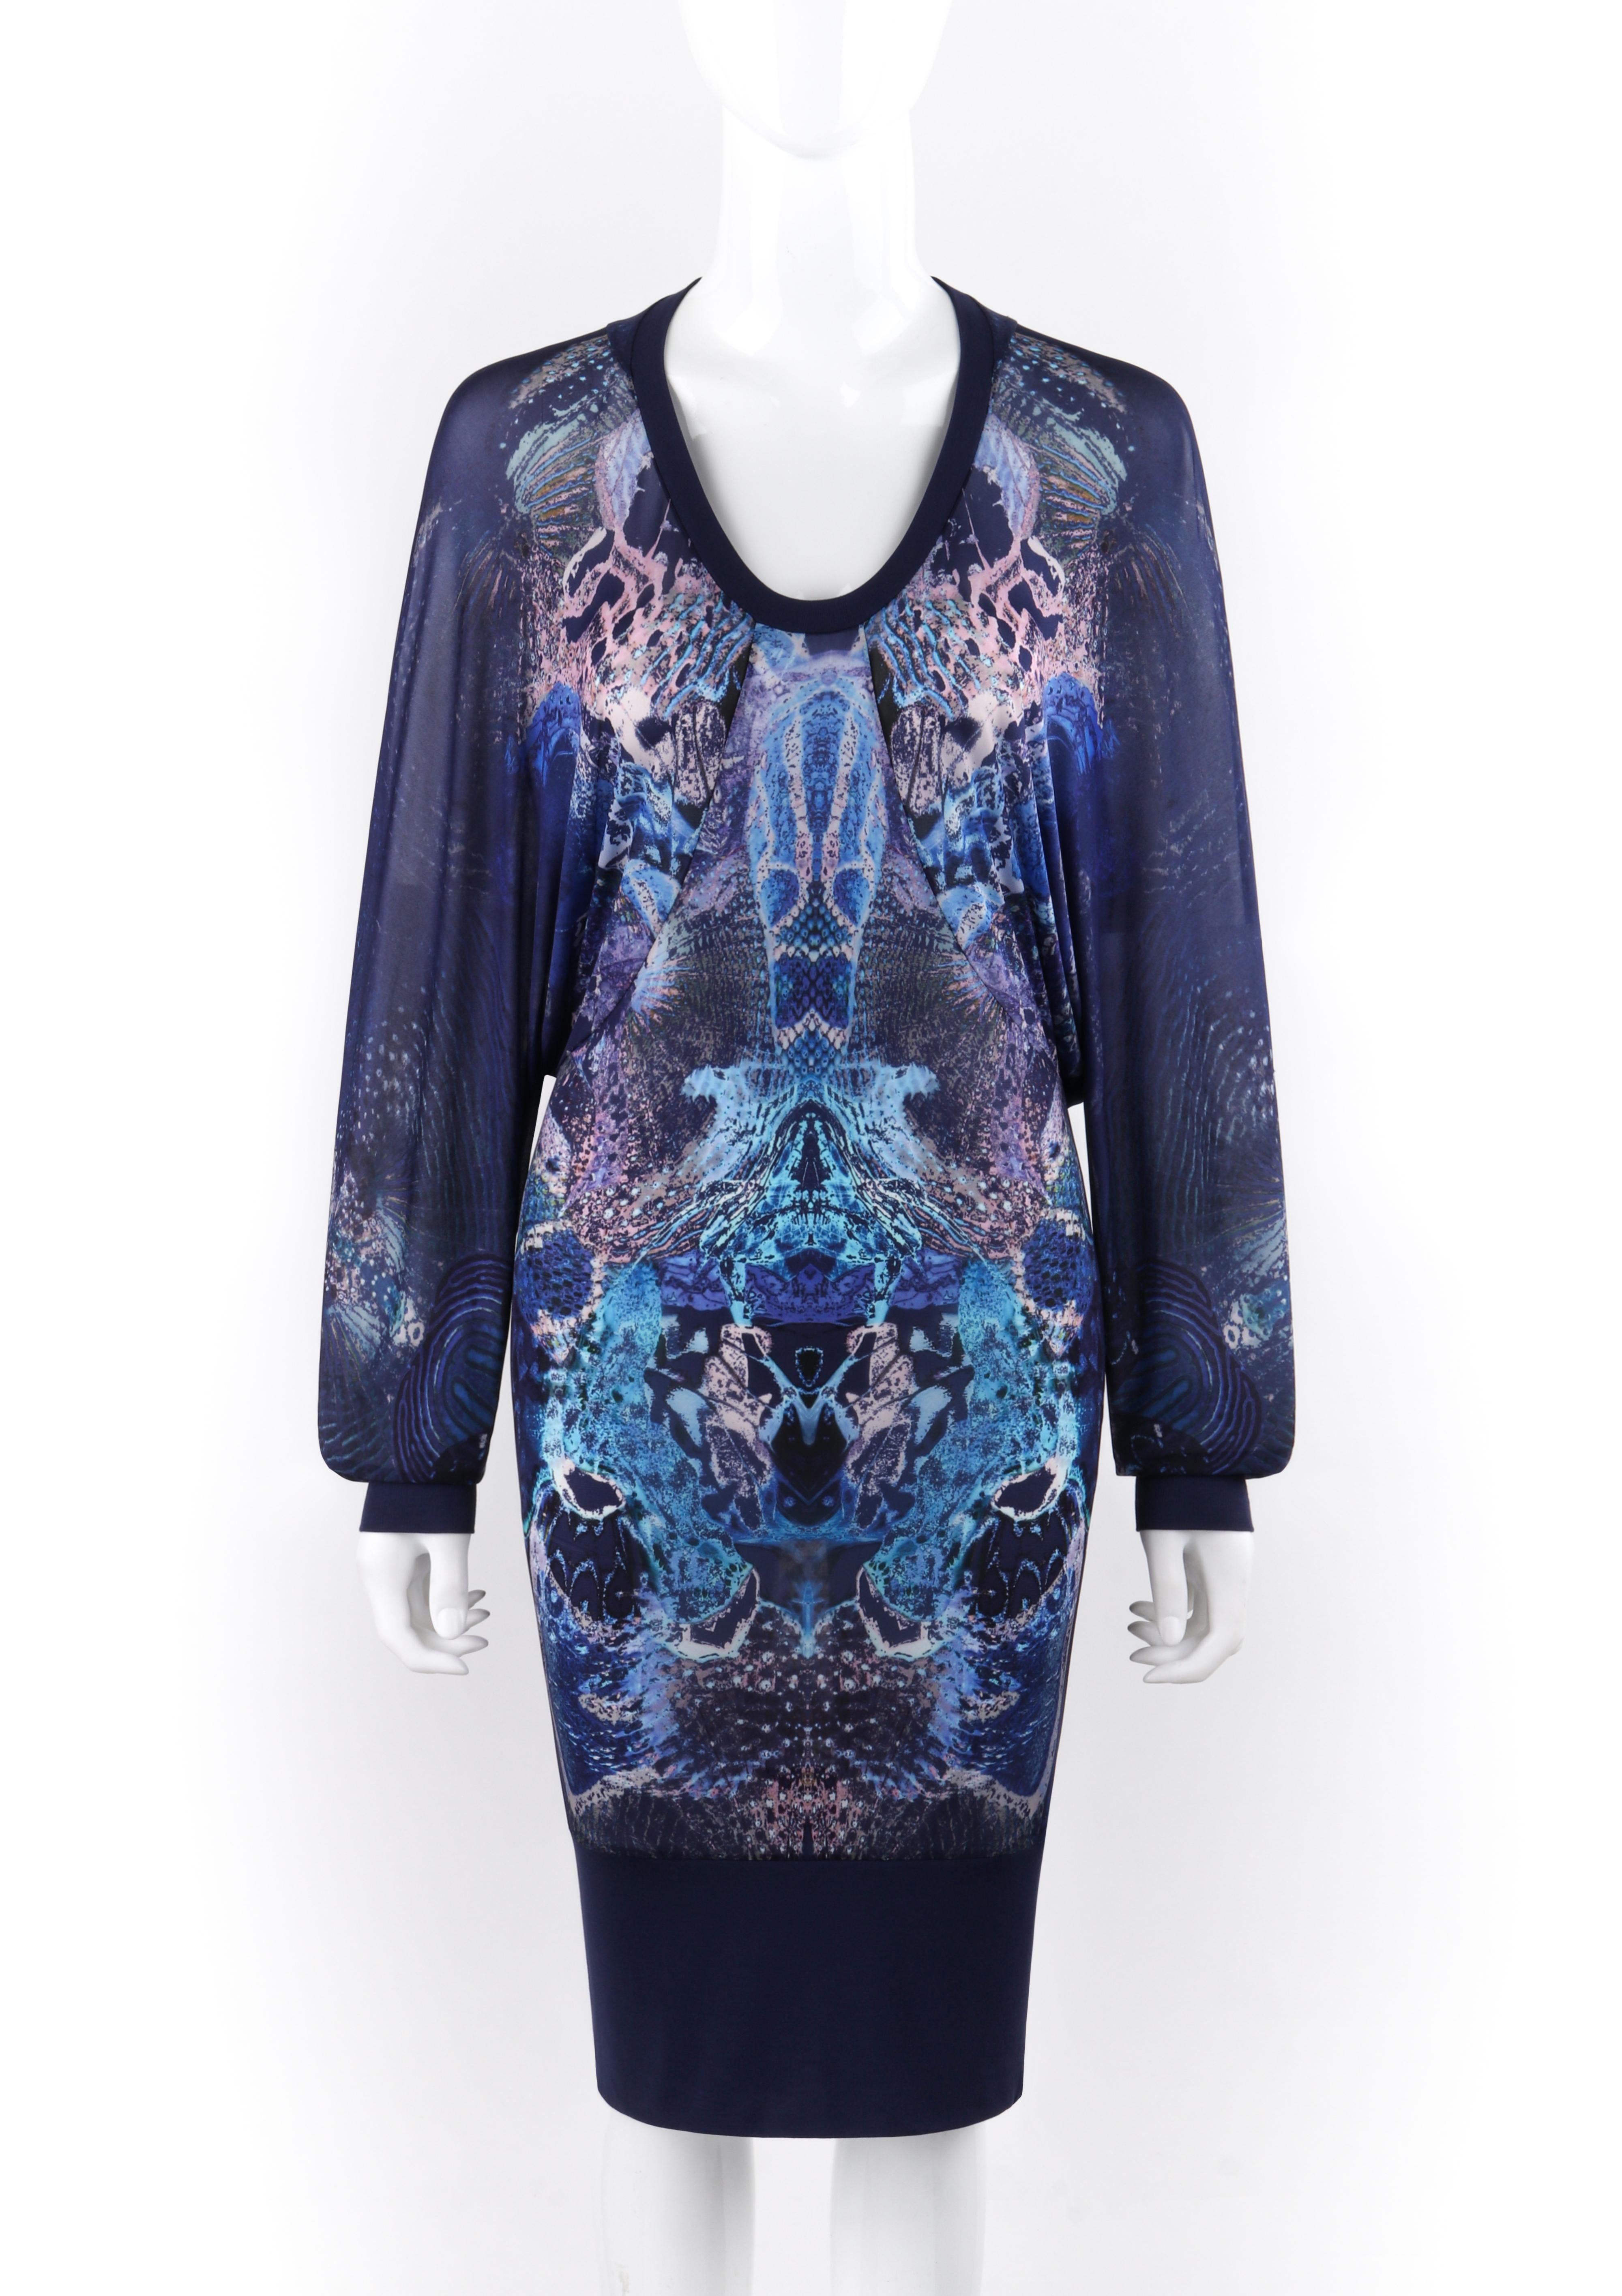 ALEXANDER McQUEEN S/S 2010 “Plato's Atlantis” Kaleidoscope Dolman Sleeve Dress 
 
Brand / Manufacturer: Alexander McQueen
Collection: S/S 2010
Style: Dolman sleeve bodycon dress
Color(s): Shades of blue, purple, green, and white
Lined: No
Marked